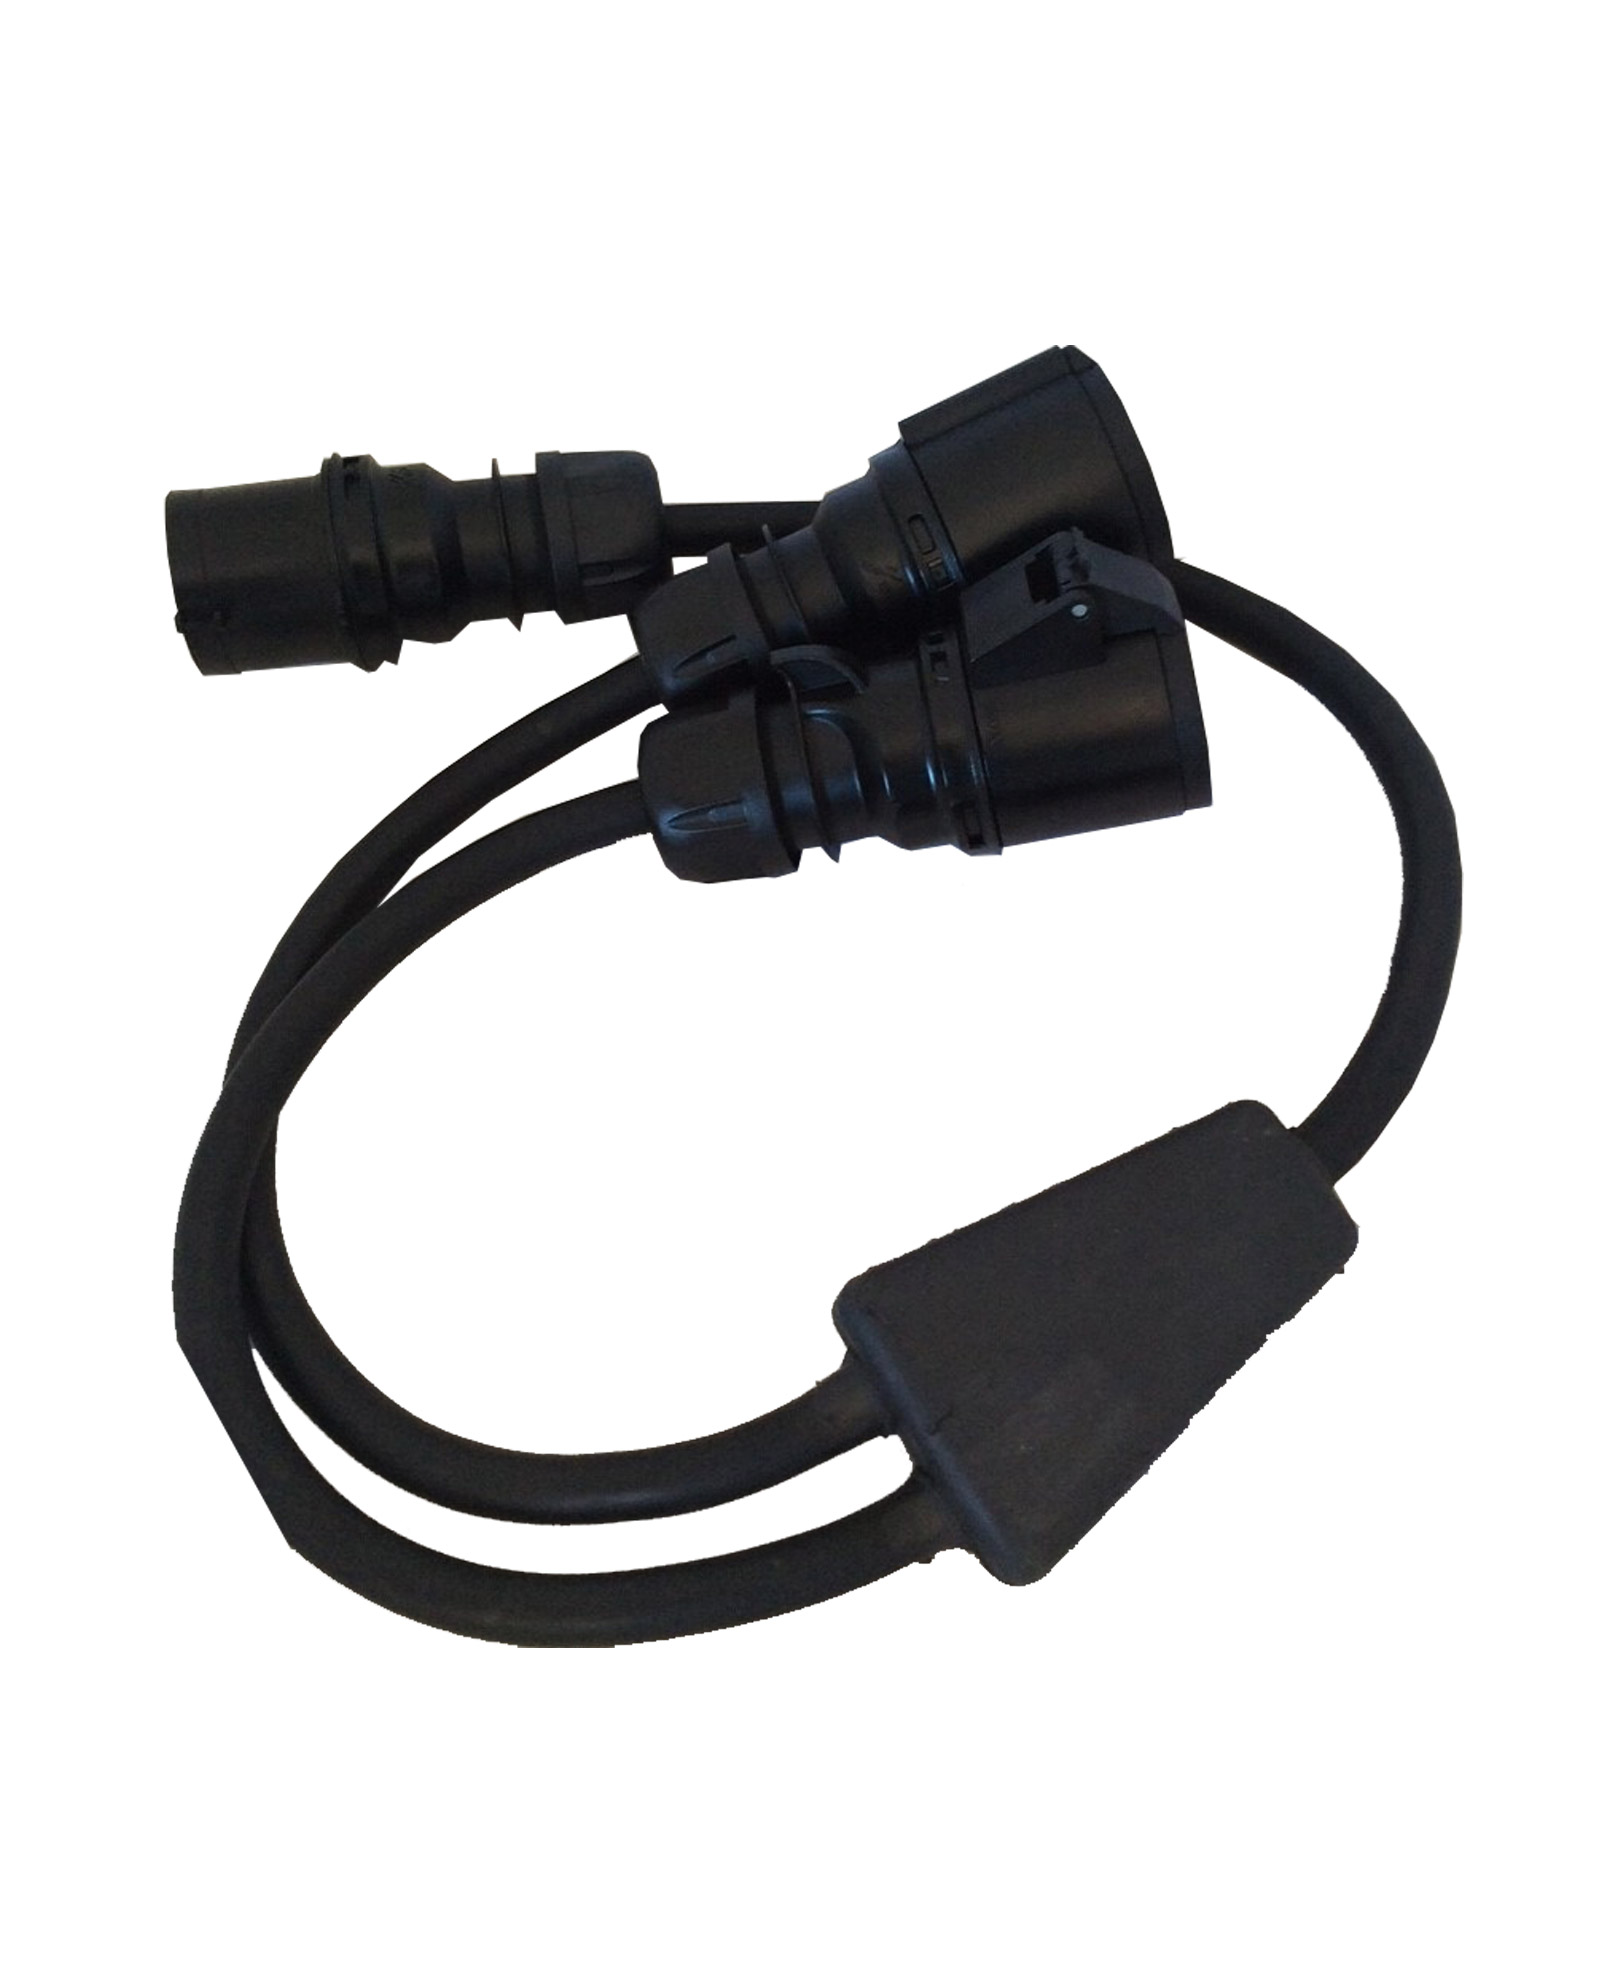 32A 3 Phase Y Splitter Lead - Ceeform - 5 core 4.0mm Rubber HO7 Cable